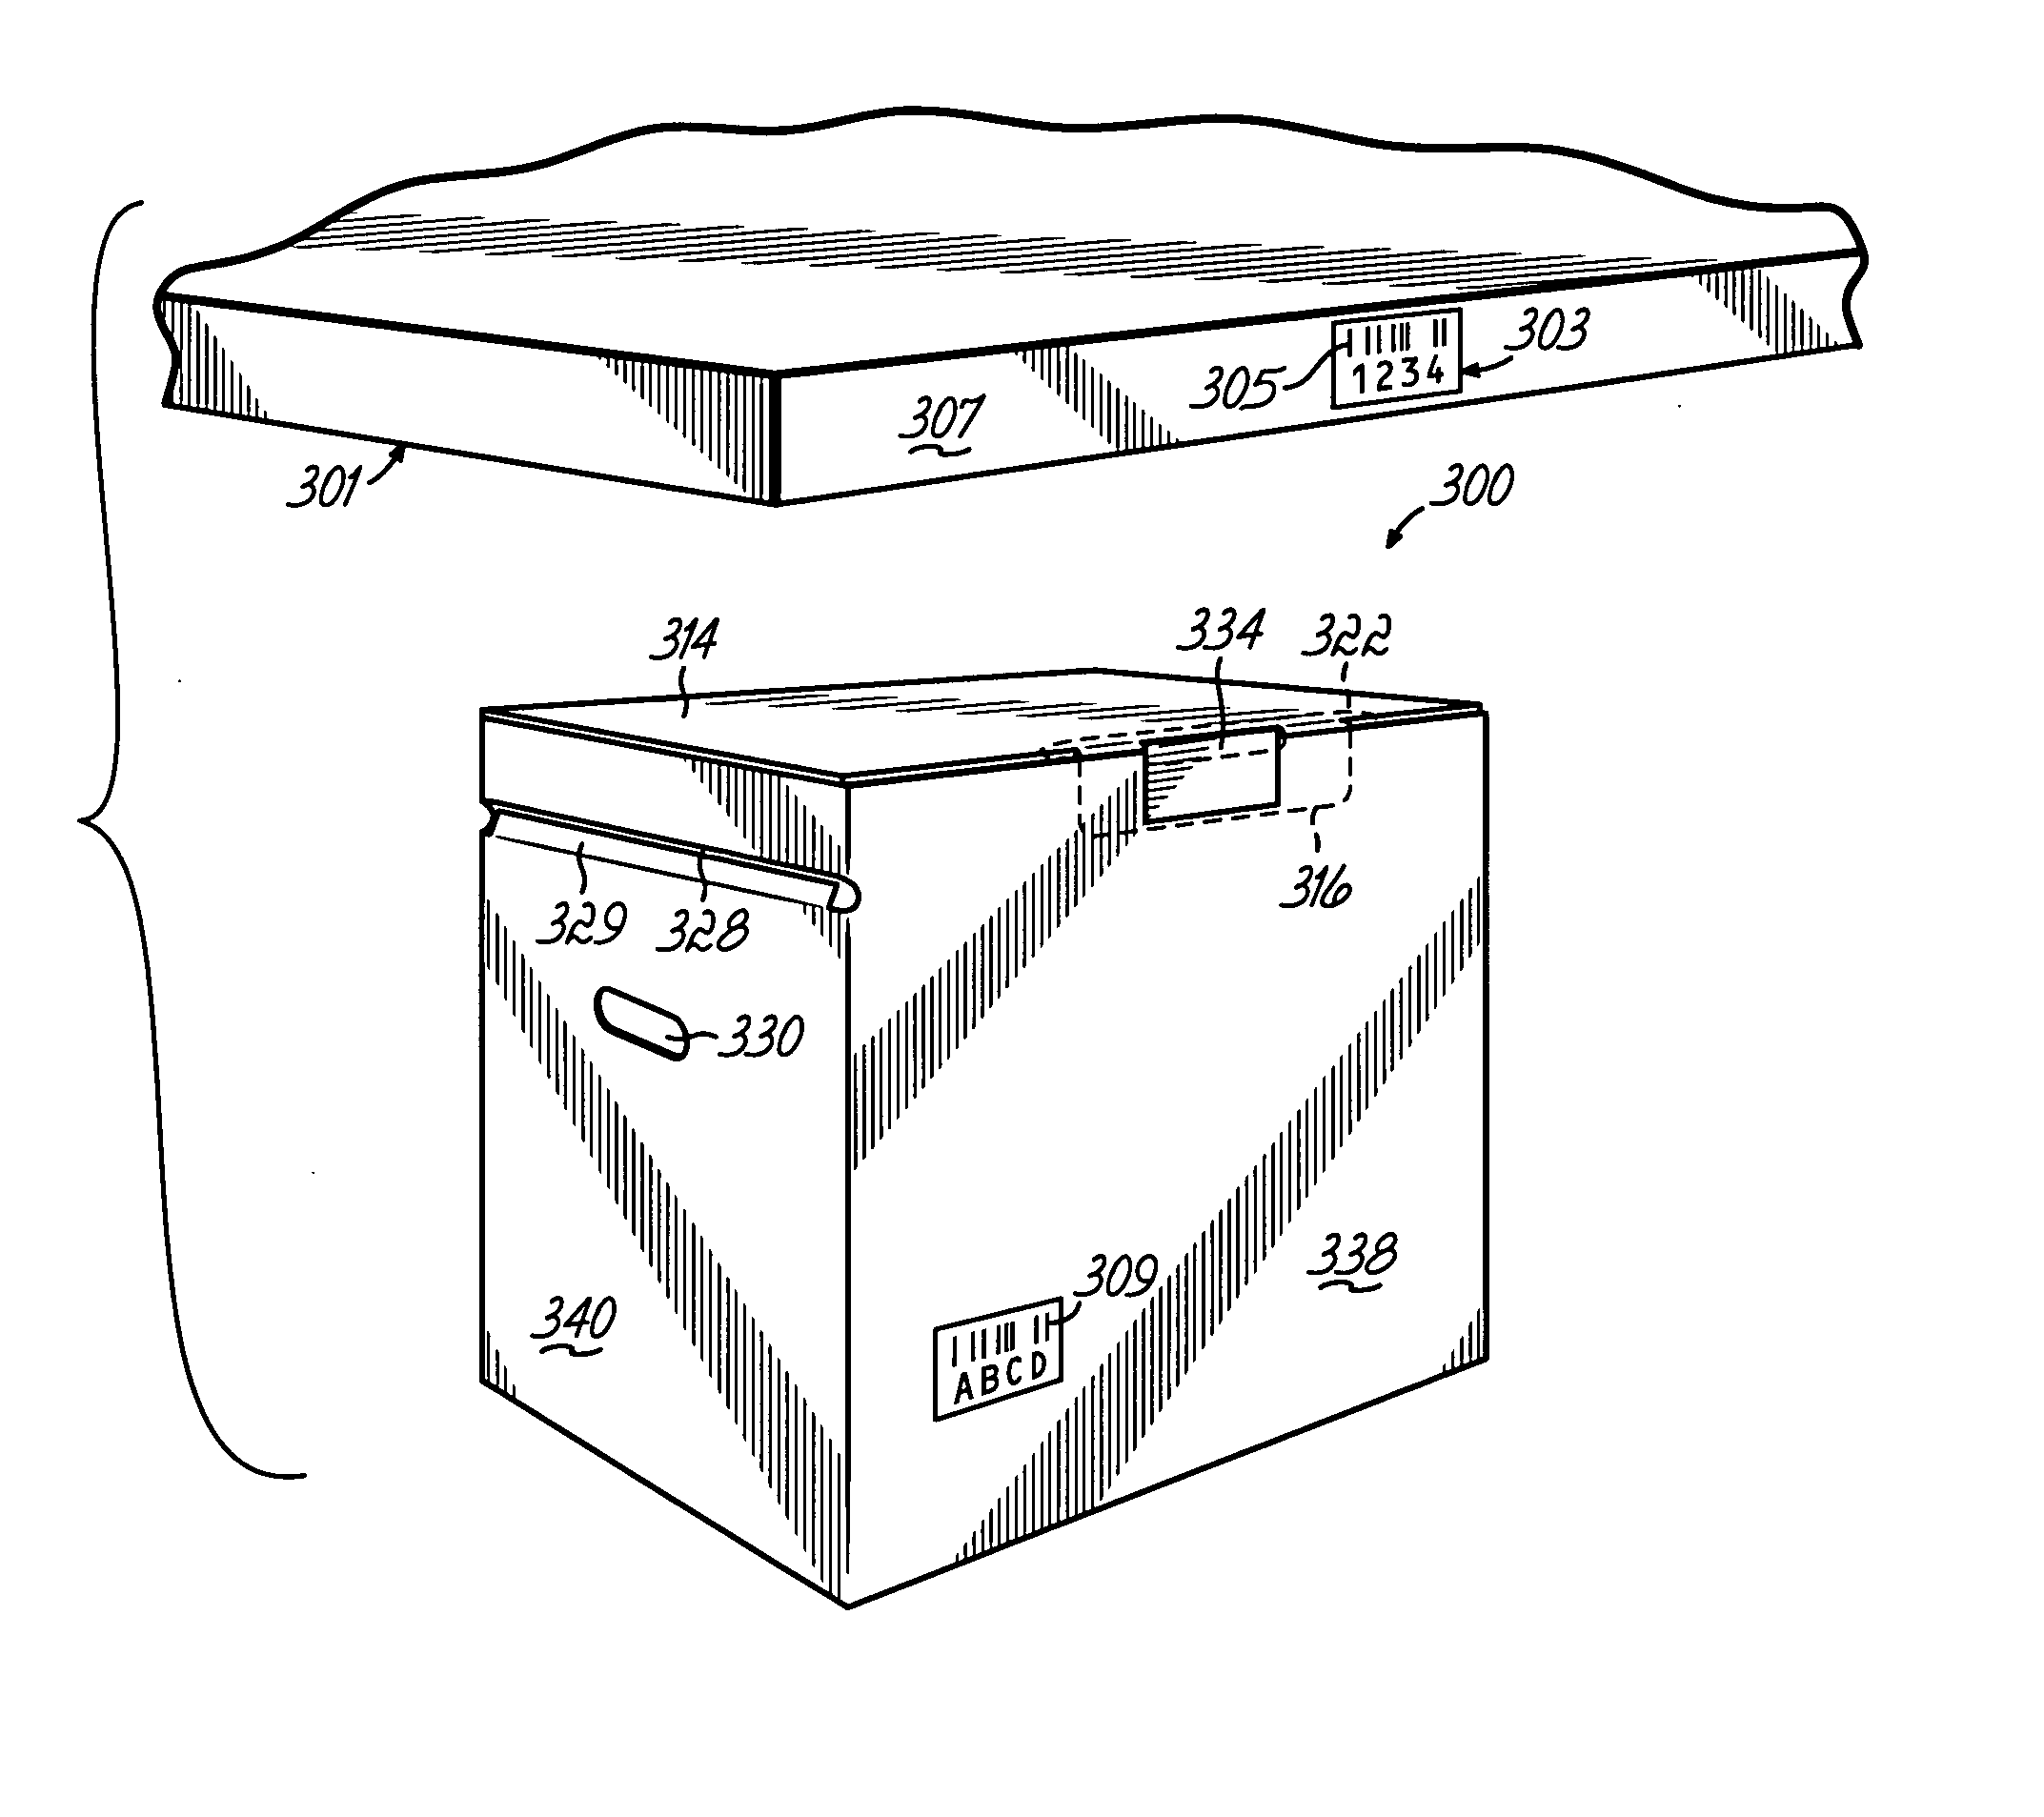 Item collection bin and disposal method